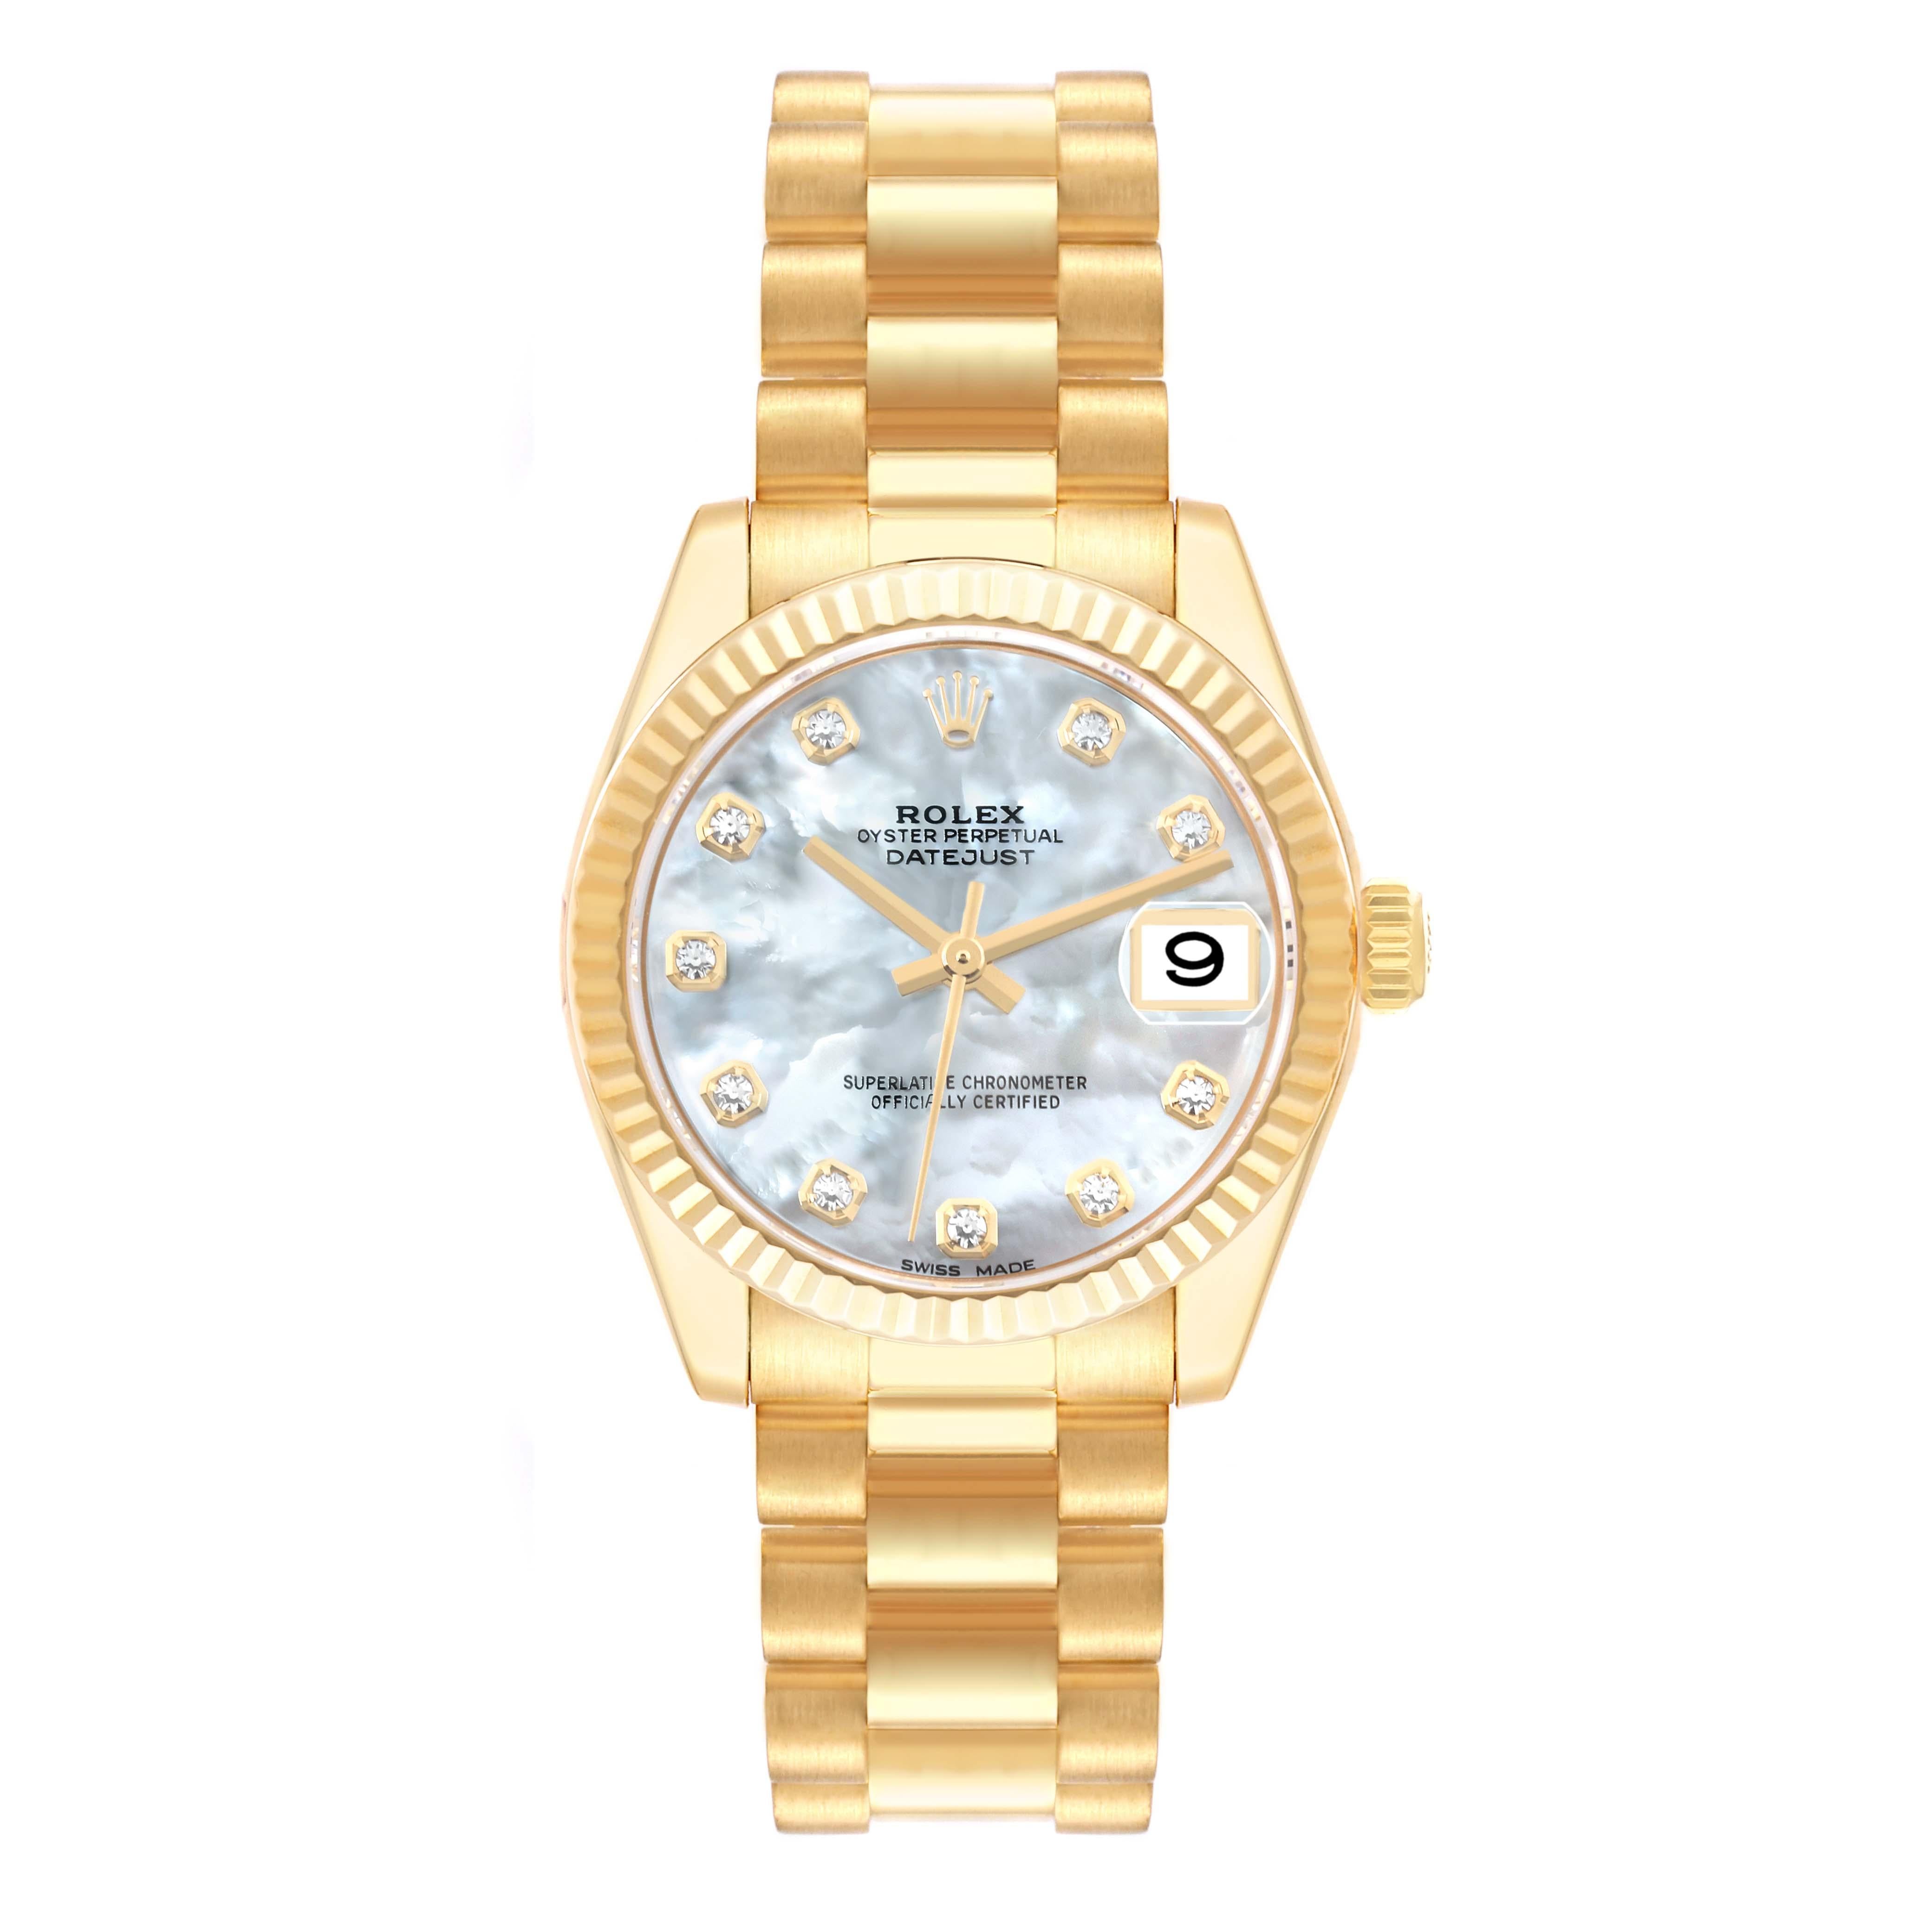 Rolex President Midsize Yellow Gold MOP Diamond Dial Ladies Watch 178278. Officially certified chronometer self-winding movement. 18k yellow gold oyster case 31.0 mm in diameter. Rolex logo on a crown. 18k yellow gold fluted bezel. Scratch resistant